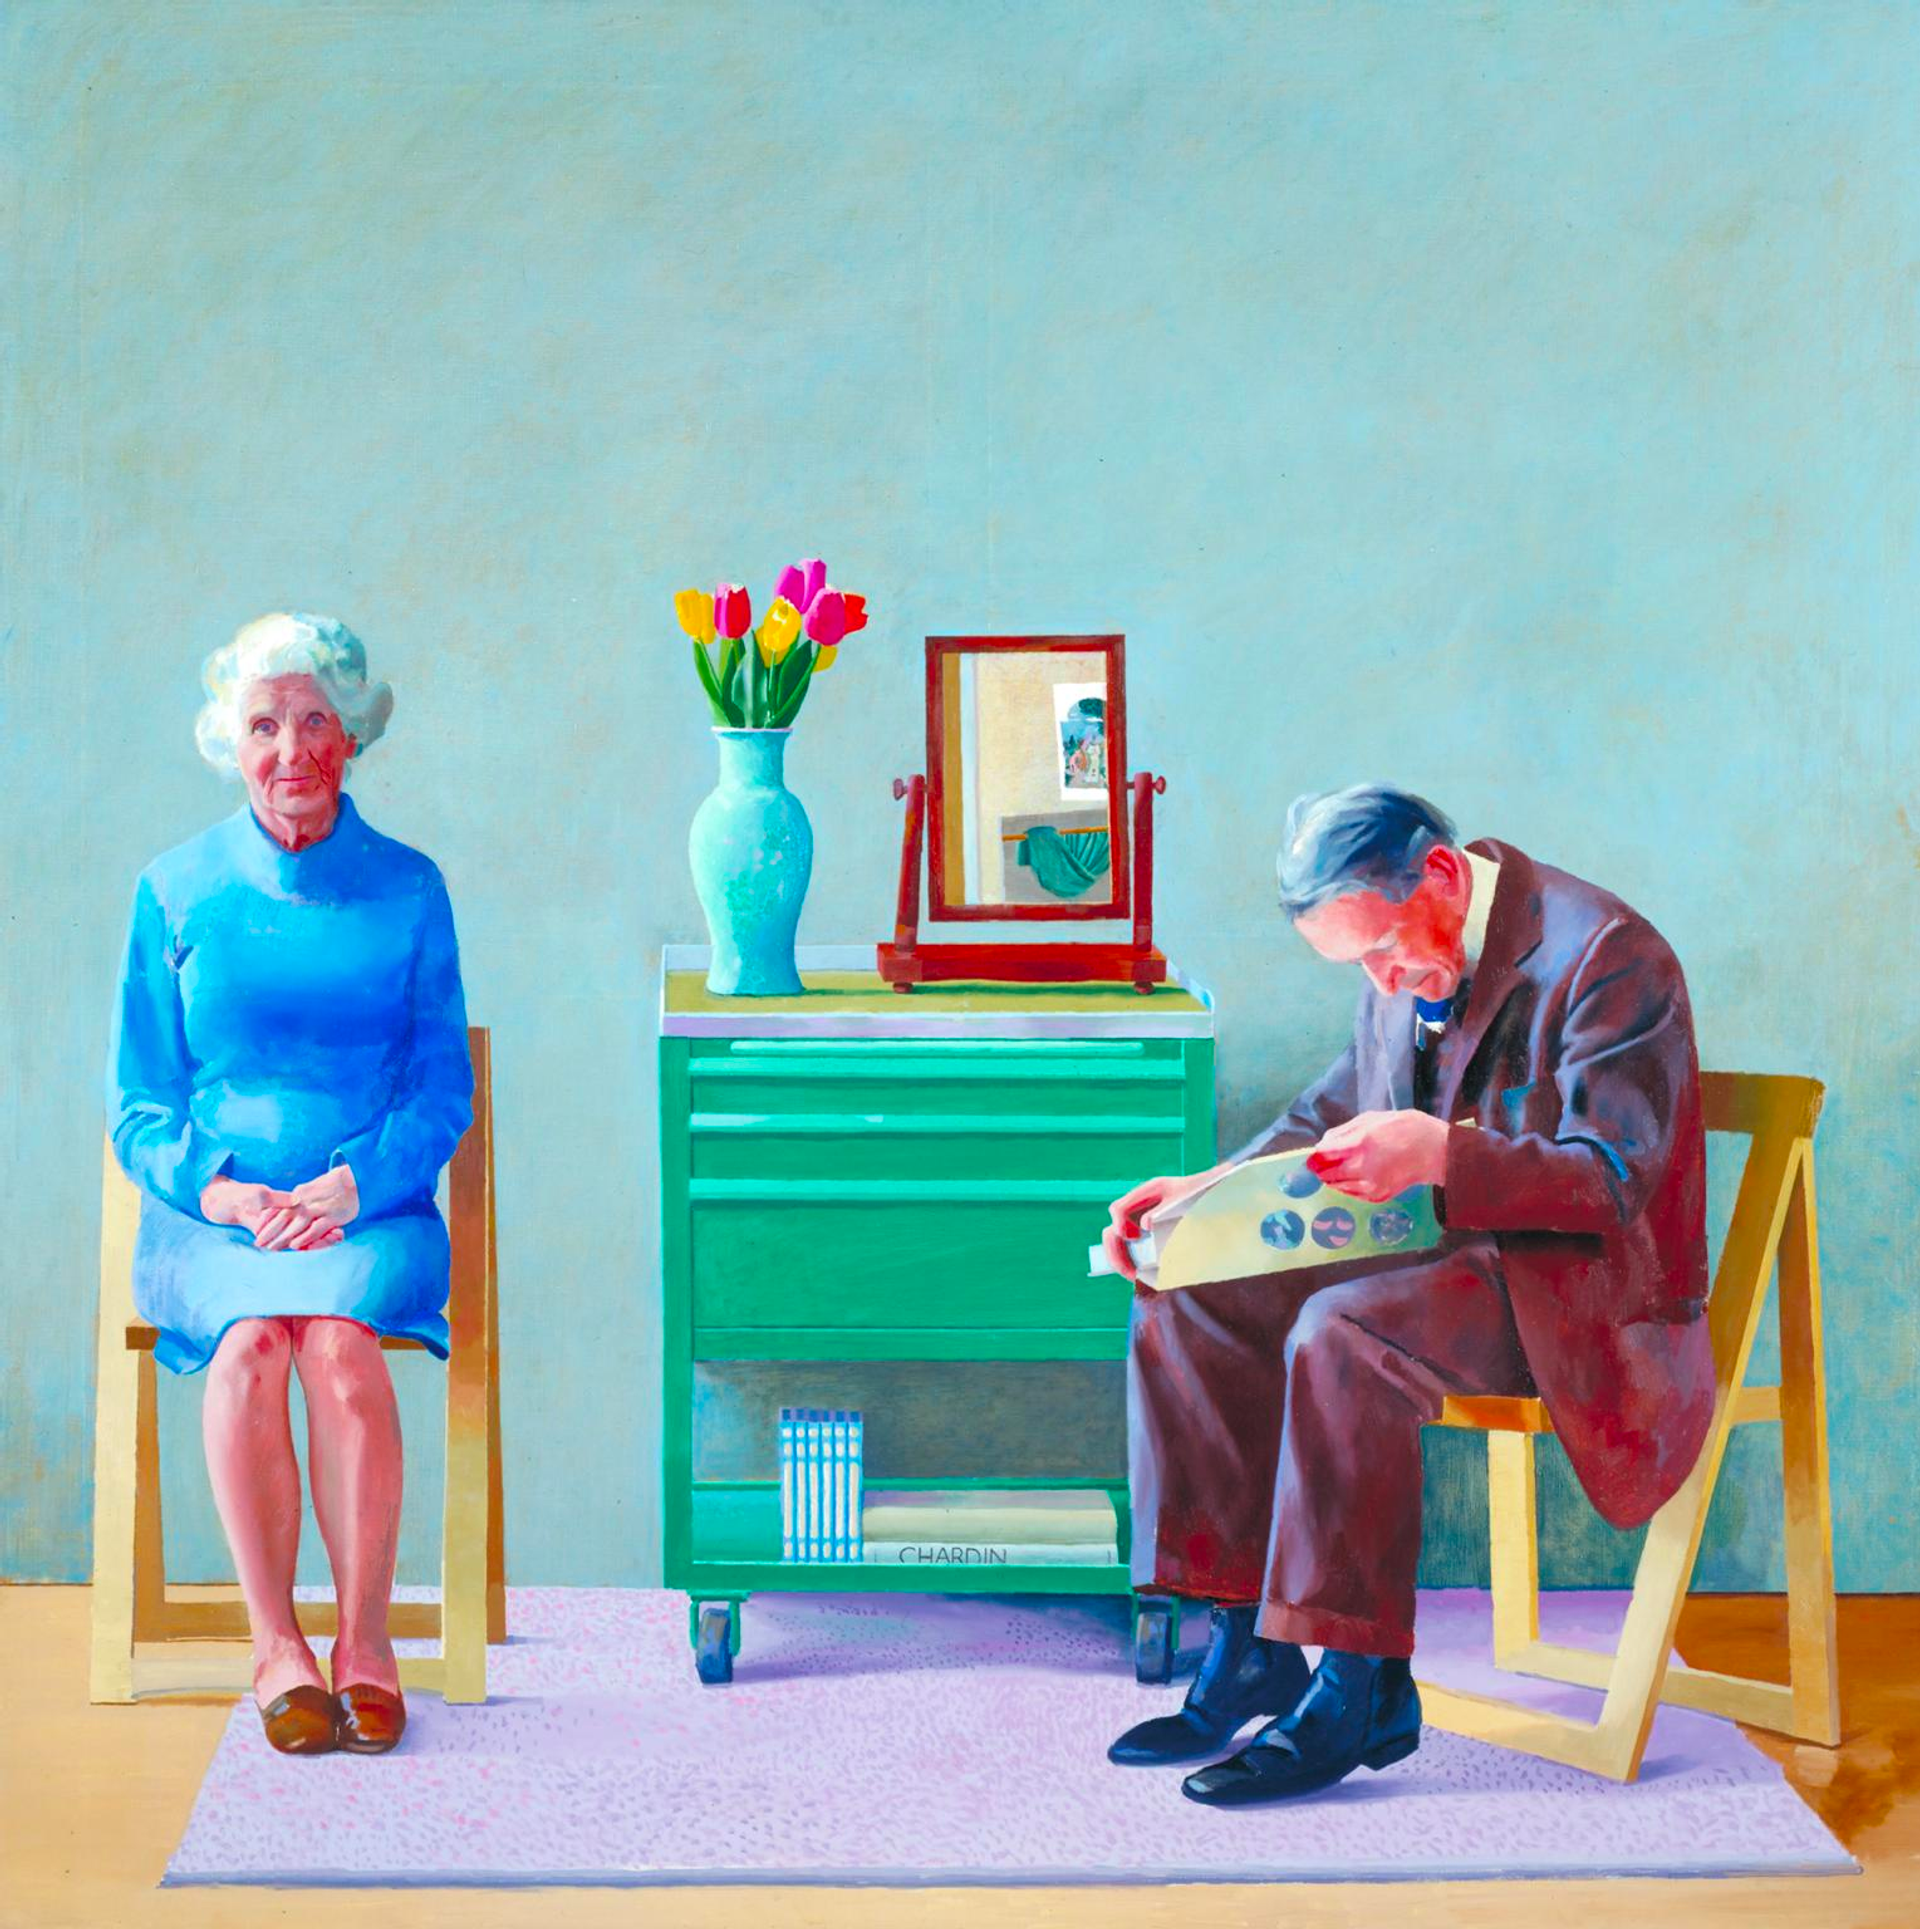 A woman in a blue dress sits facing the painter; a man in a brown suit suits adjacent to her, reading a book. A green furniture unit is in between the subjects, flowers in a vase and a mirror sit on top of it.